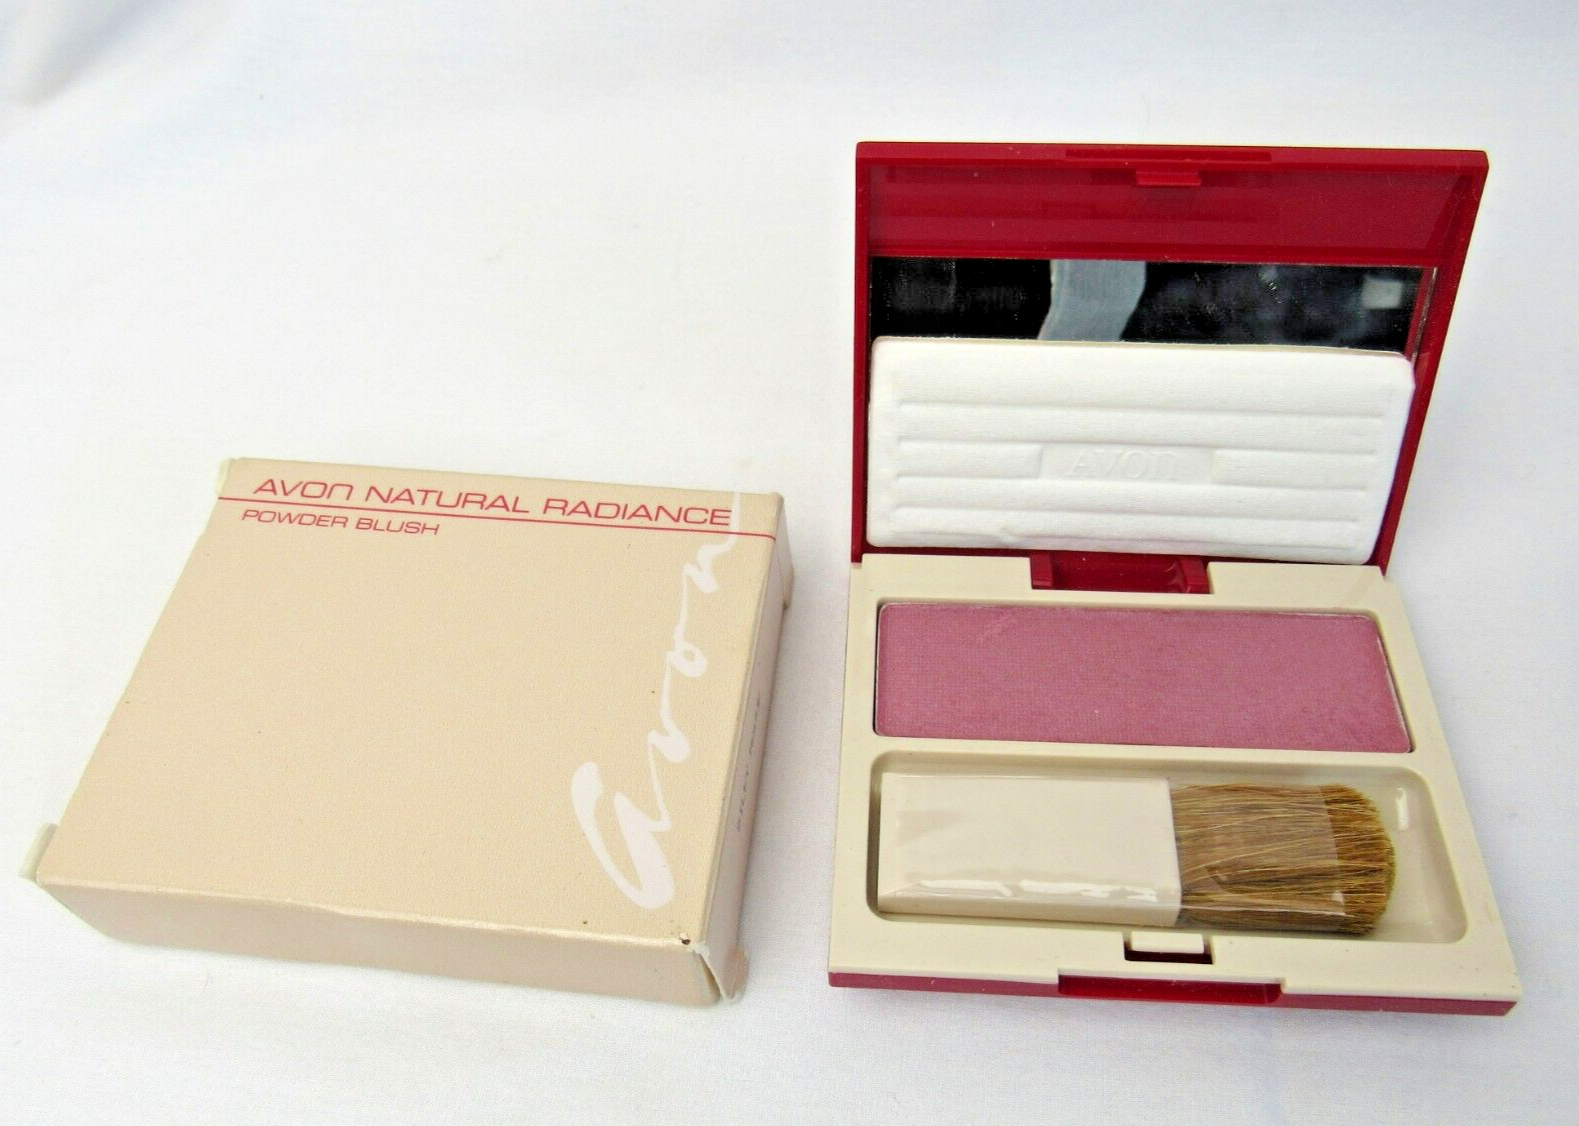 AVON Natural Radiance Powder Blush - Silky Mauve .23 oz with BOX New Old Stock - $14.00